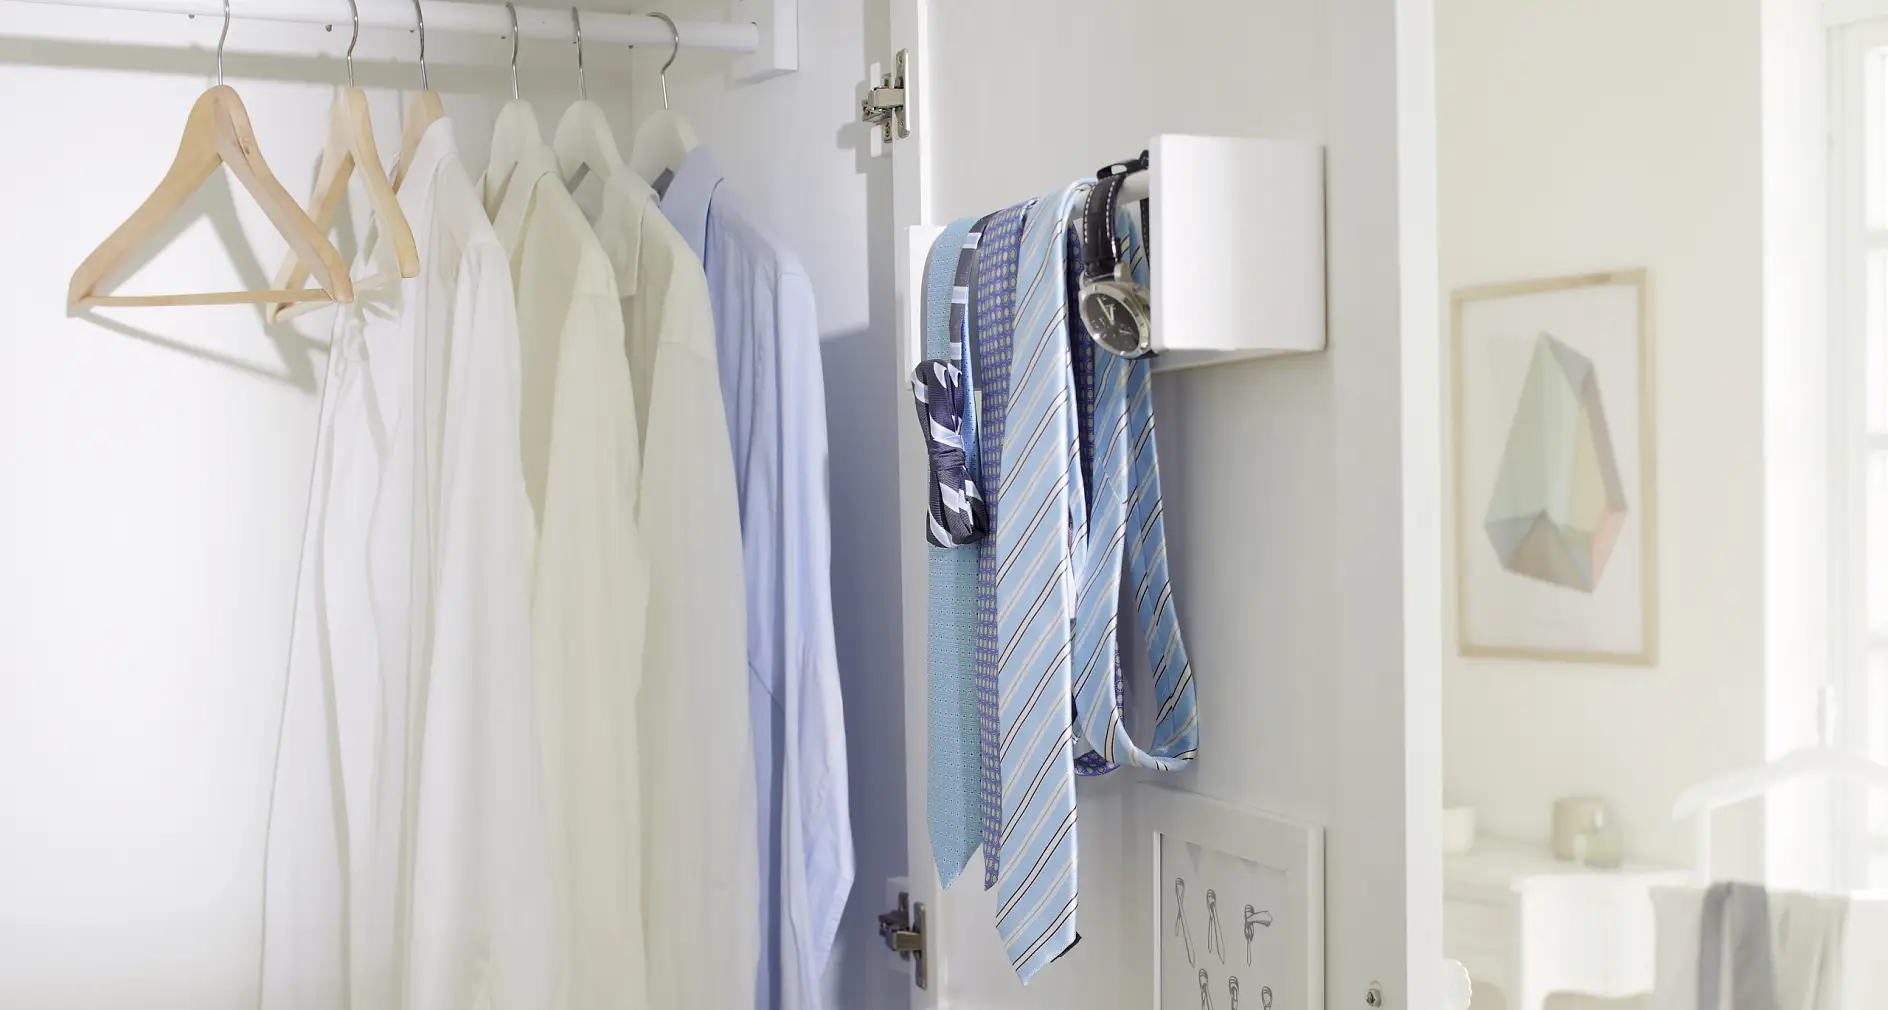 Too many ties and nowhere to hang them? No problem. Why not convert a spice rack into a handy tie rack? It's quick and easy to make and held securely in place wtih tesa Powerbond® INDOOR.